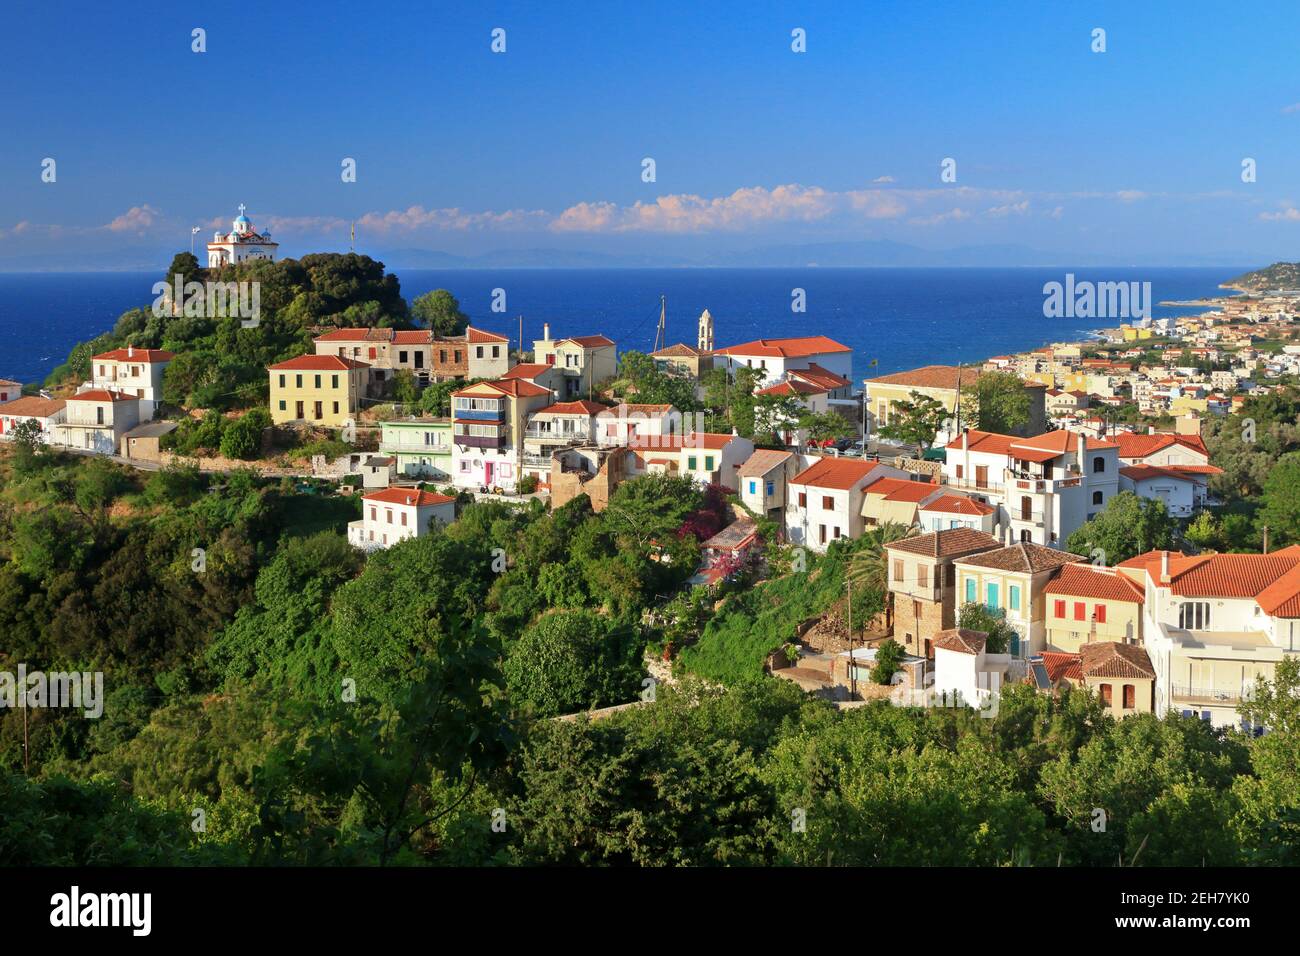 View of Old Karlovasi, the most picturesque traditional village in Samos island, Northern Aegean Sea, Greece, Europe Stock Photo